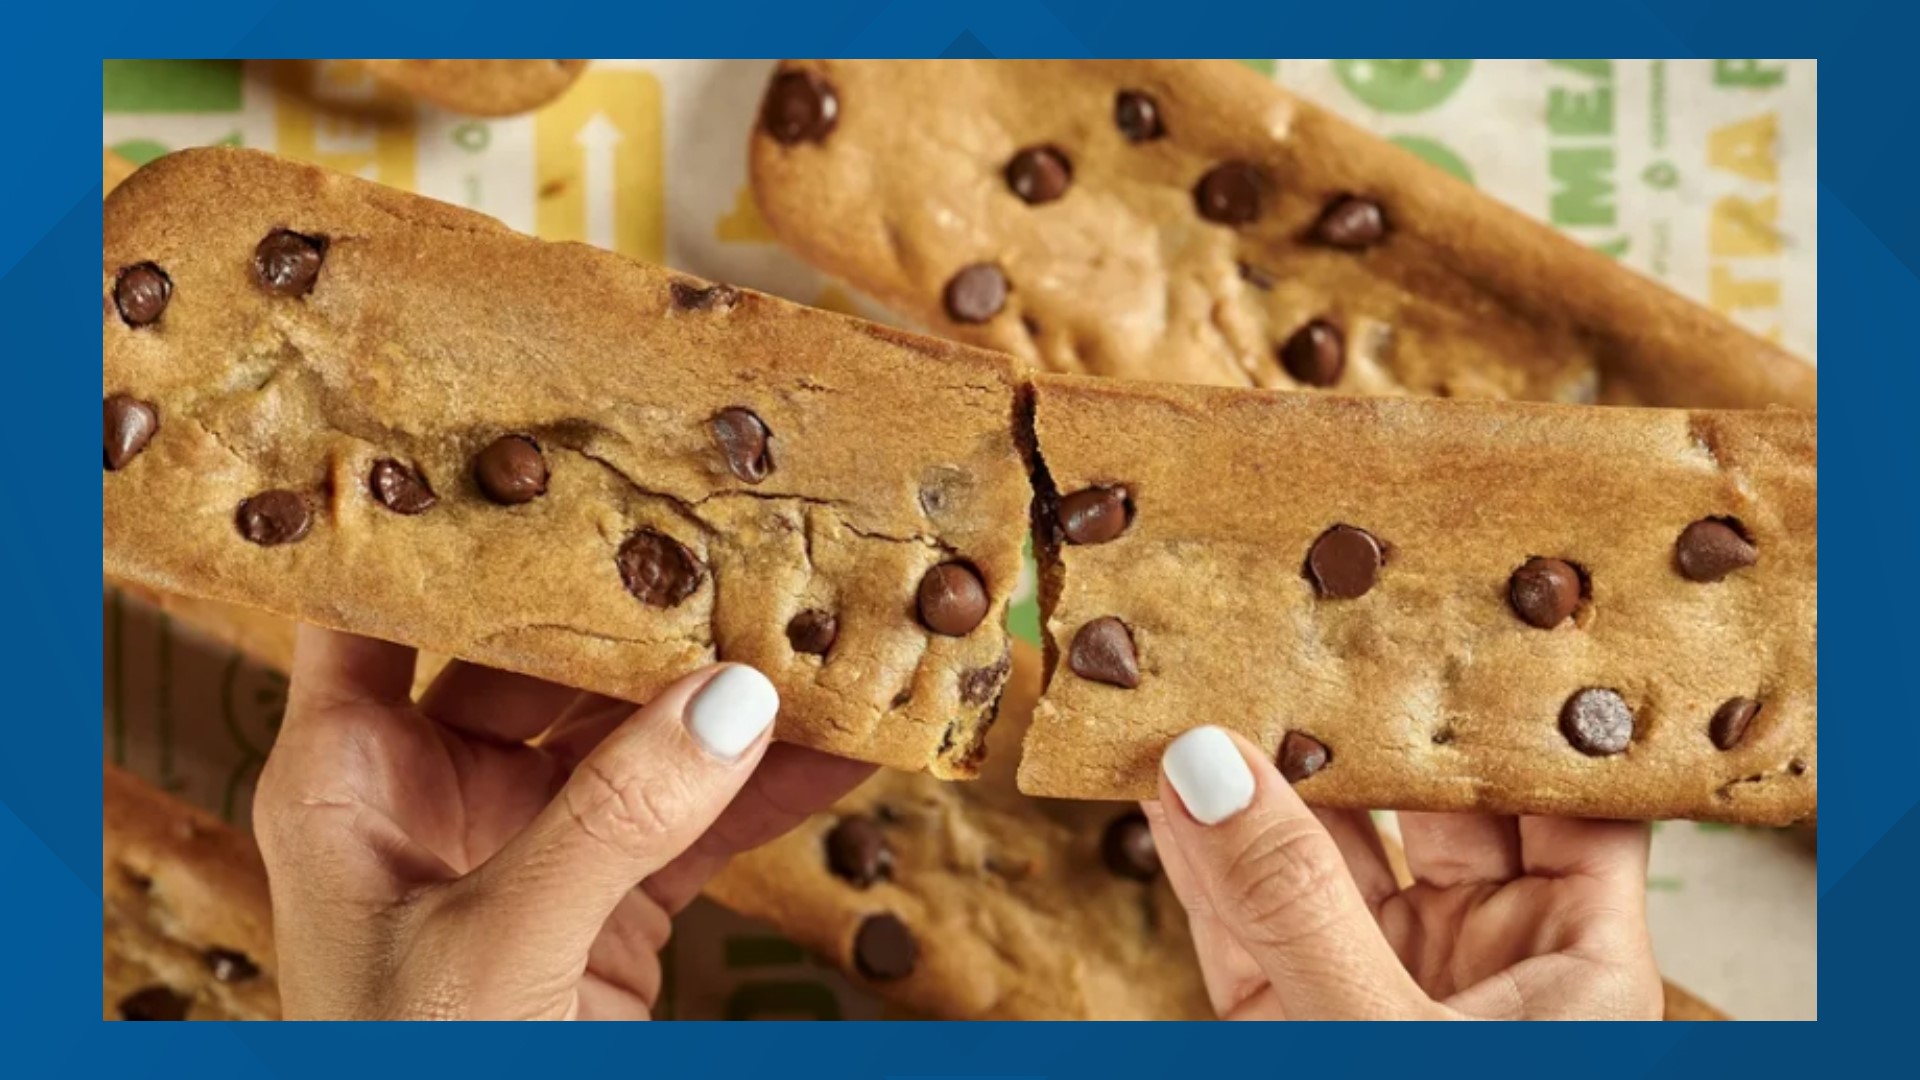 The giant treat has been pulled from third party delivery apps due to demand - but you can still get them in person.